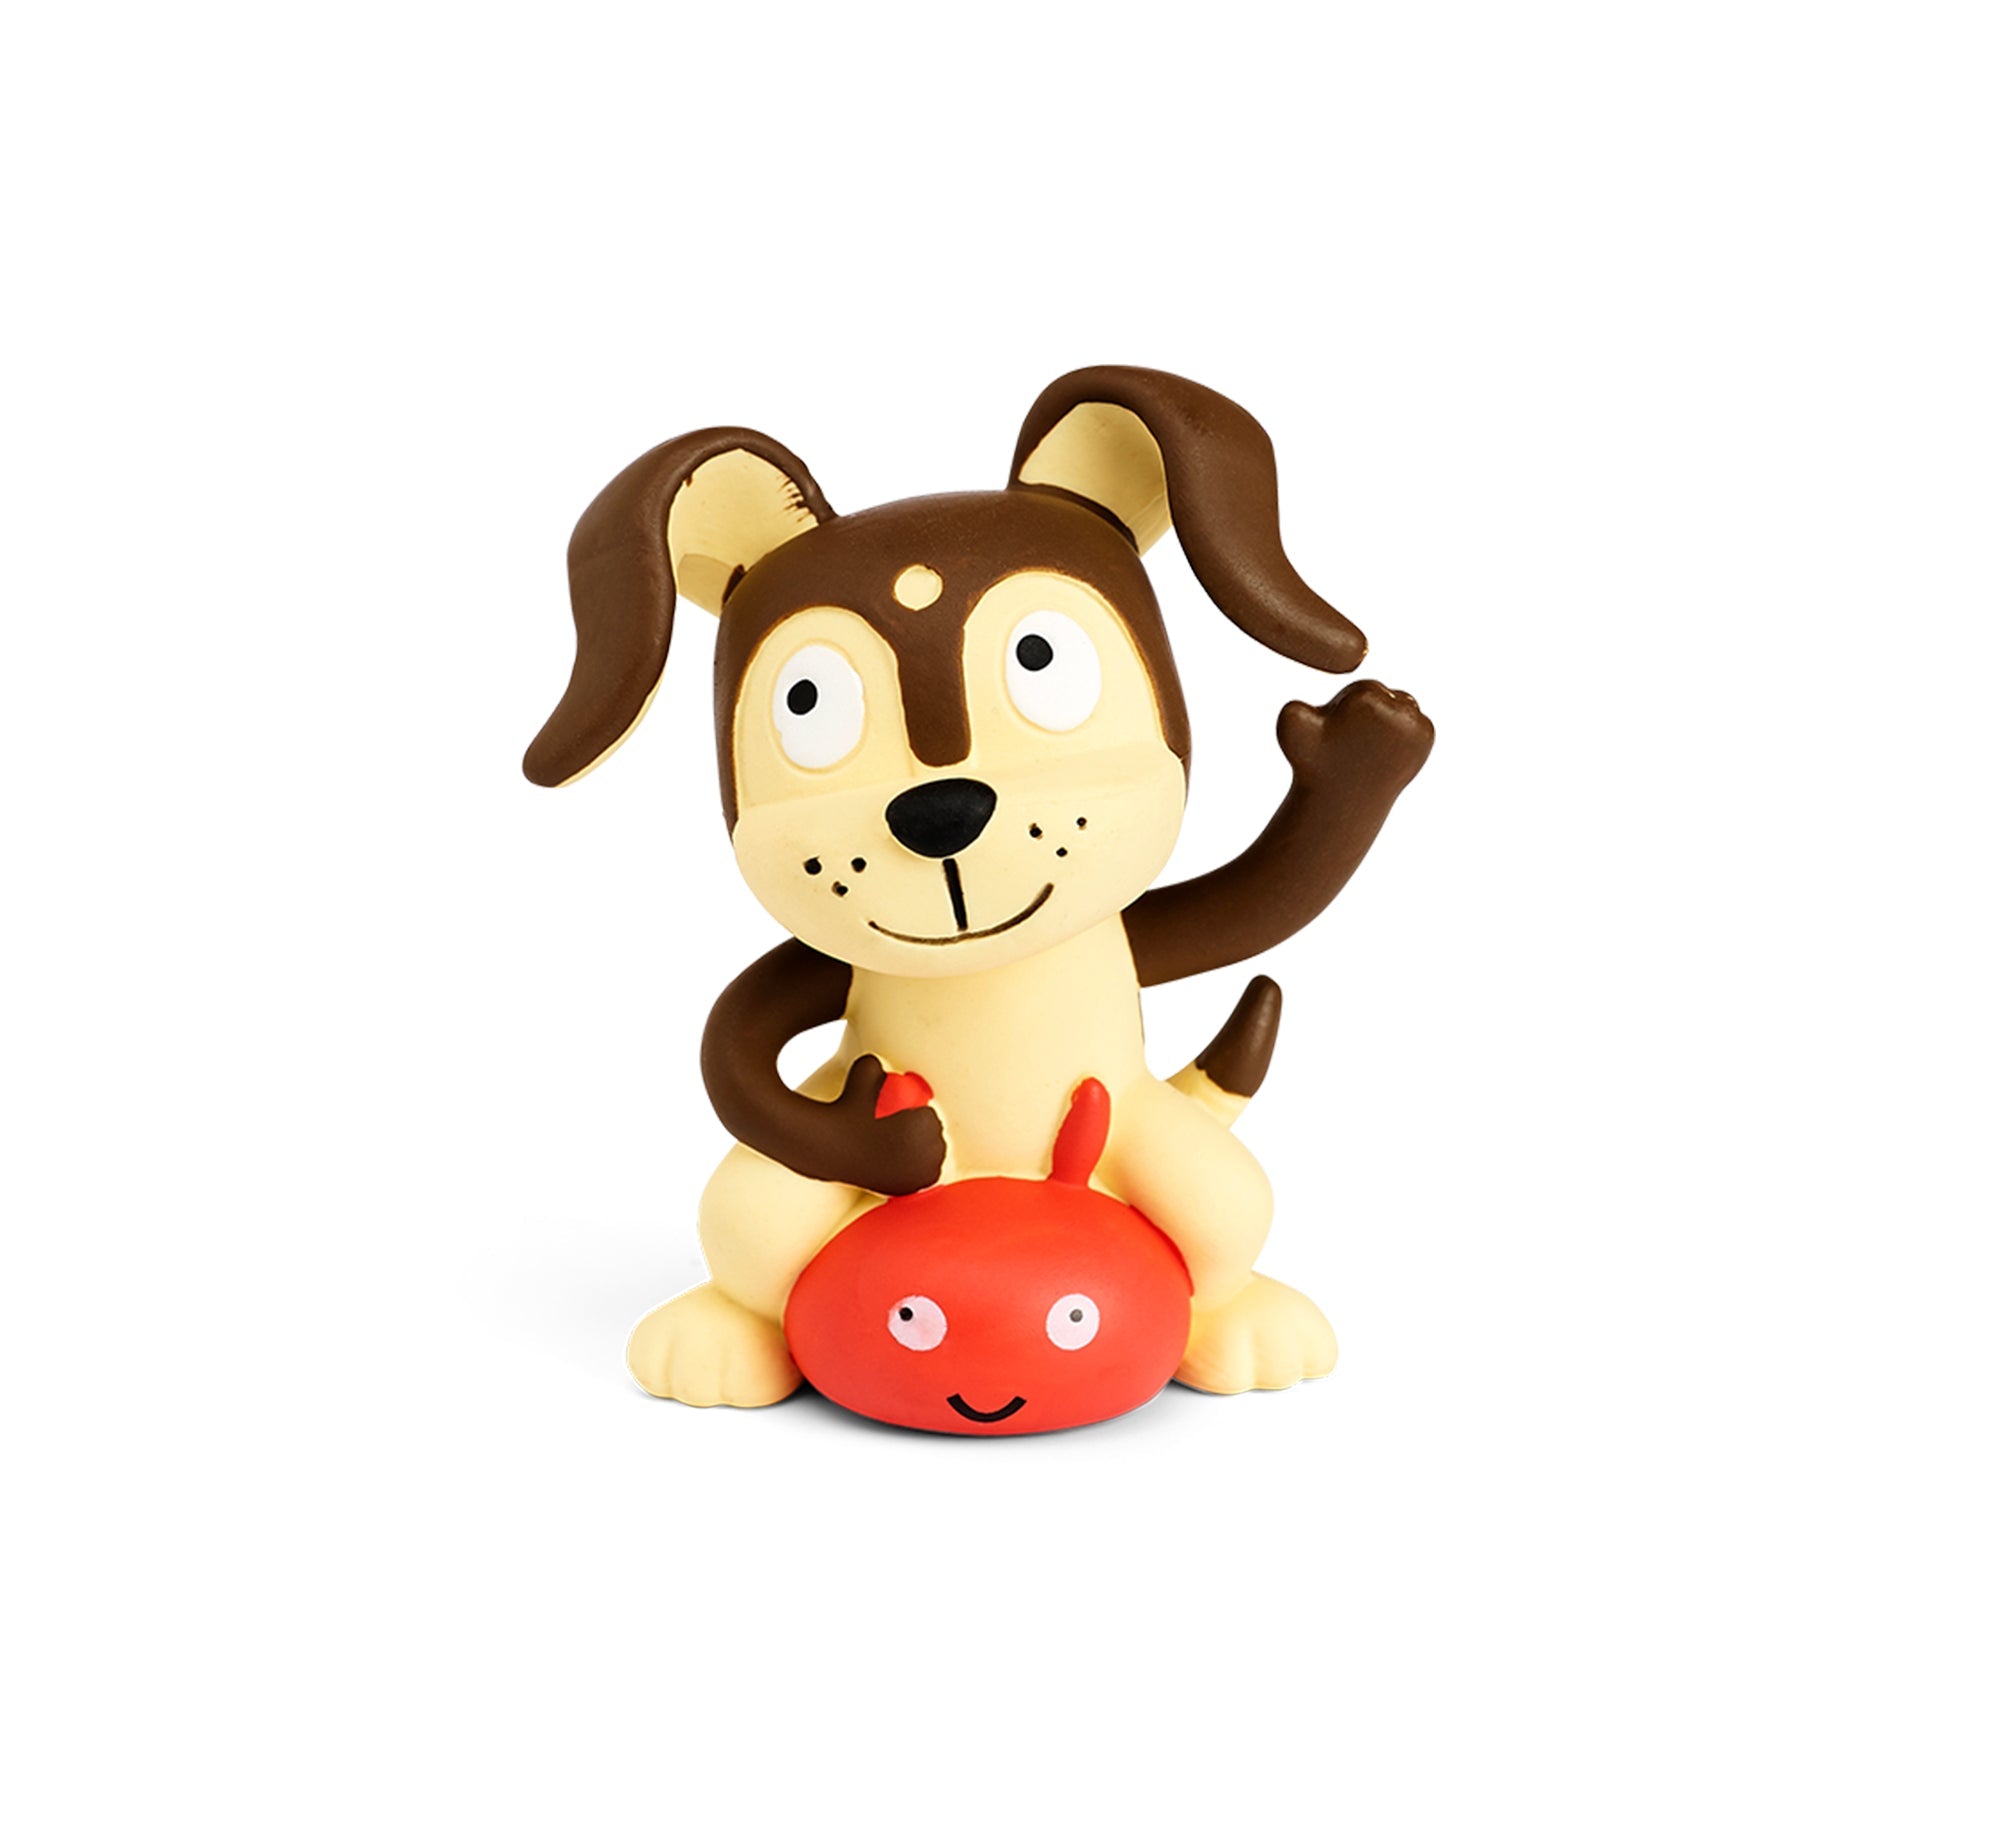 Tonies Toniebox Playtime Puppy Starter Set, Red - ANB Baby -840147403759$75 - $100